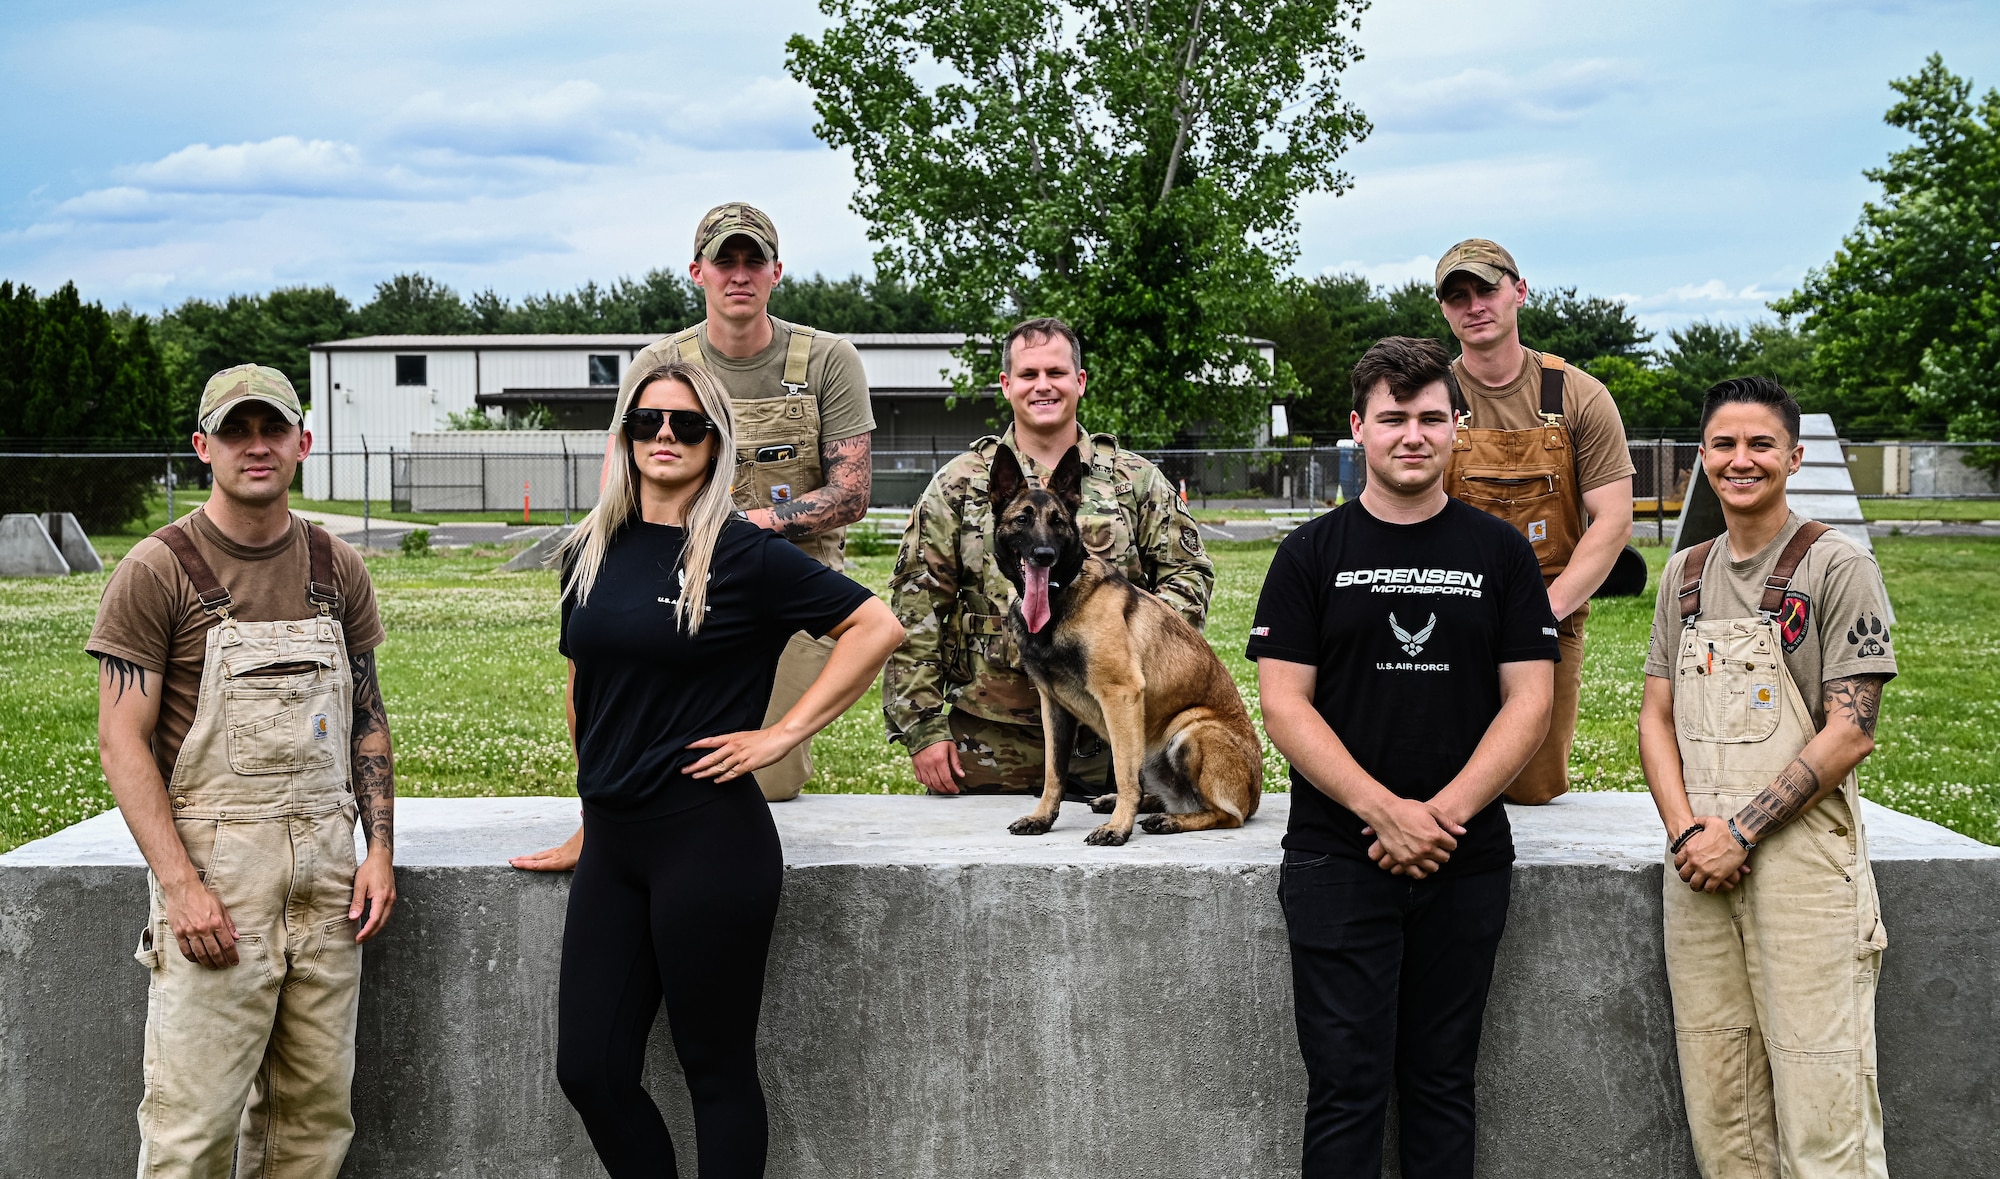 Formula Drift drivers Branden and Amanda Sorenson pose for a group photo with Airman from the Military Working Dog kennel, 87th Security Forces Squadron at Joint Base McGuire-Dix-Lakehurst on June 7, 2022. Drift team duo Branden and Amanda Sorensen visited JB MDL to interact with Airmen and learn about different Air Force career fields. Air Force Recruiting Service recently continued their 13-year partnership with the Formula Drift series. Throughout the 2022 Formula Drift circuit, the Air Force will serve as the primary sponsor for the Sorensen Motorsports team.